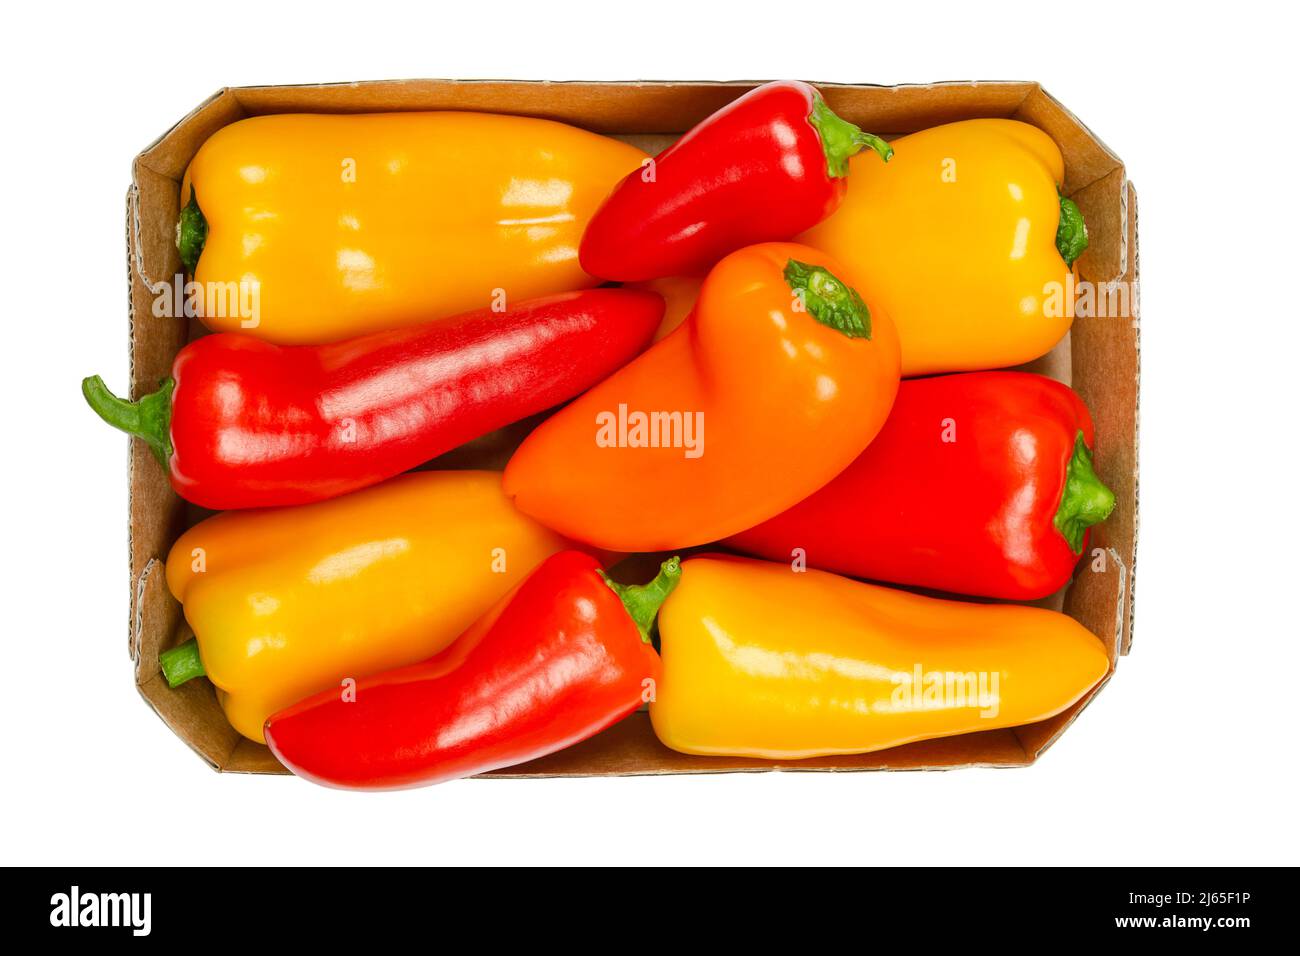 Snacking mini sweet peppers, in cardboard tray. Ripe, fresh bell peppers in three colors, also called capsicums, fruits of  vegetable Capsicum annuum. Stock Photo